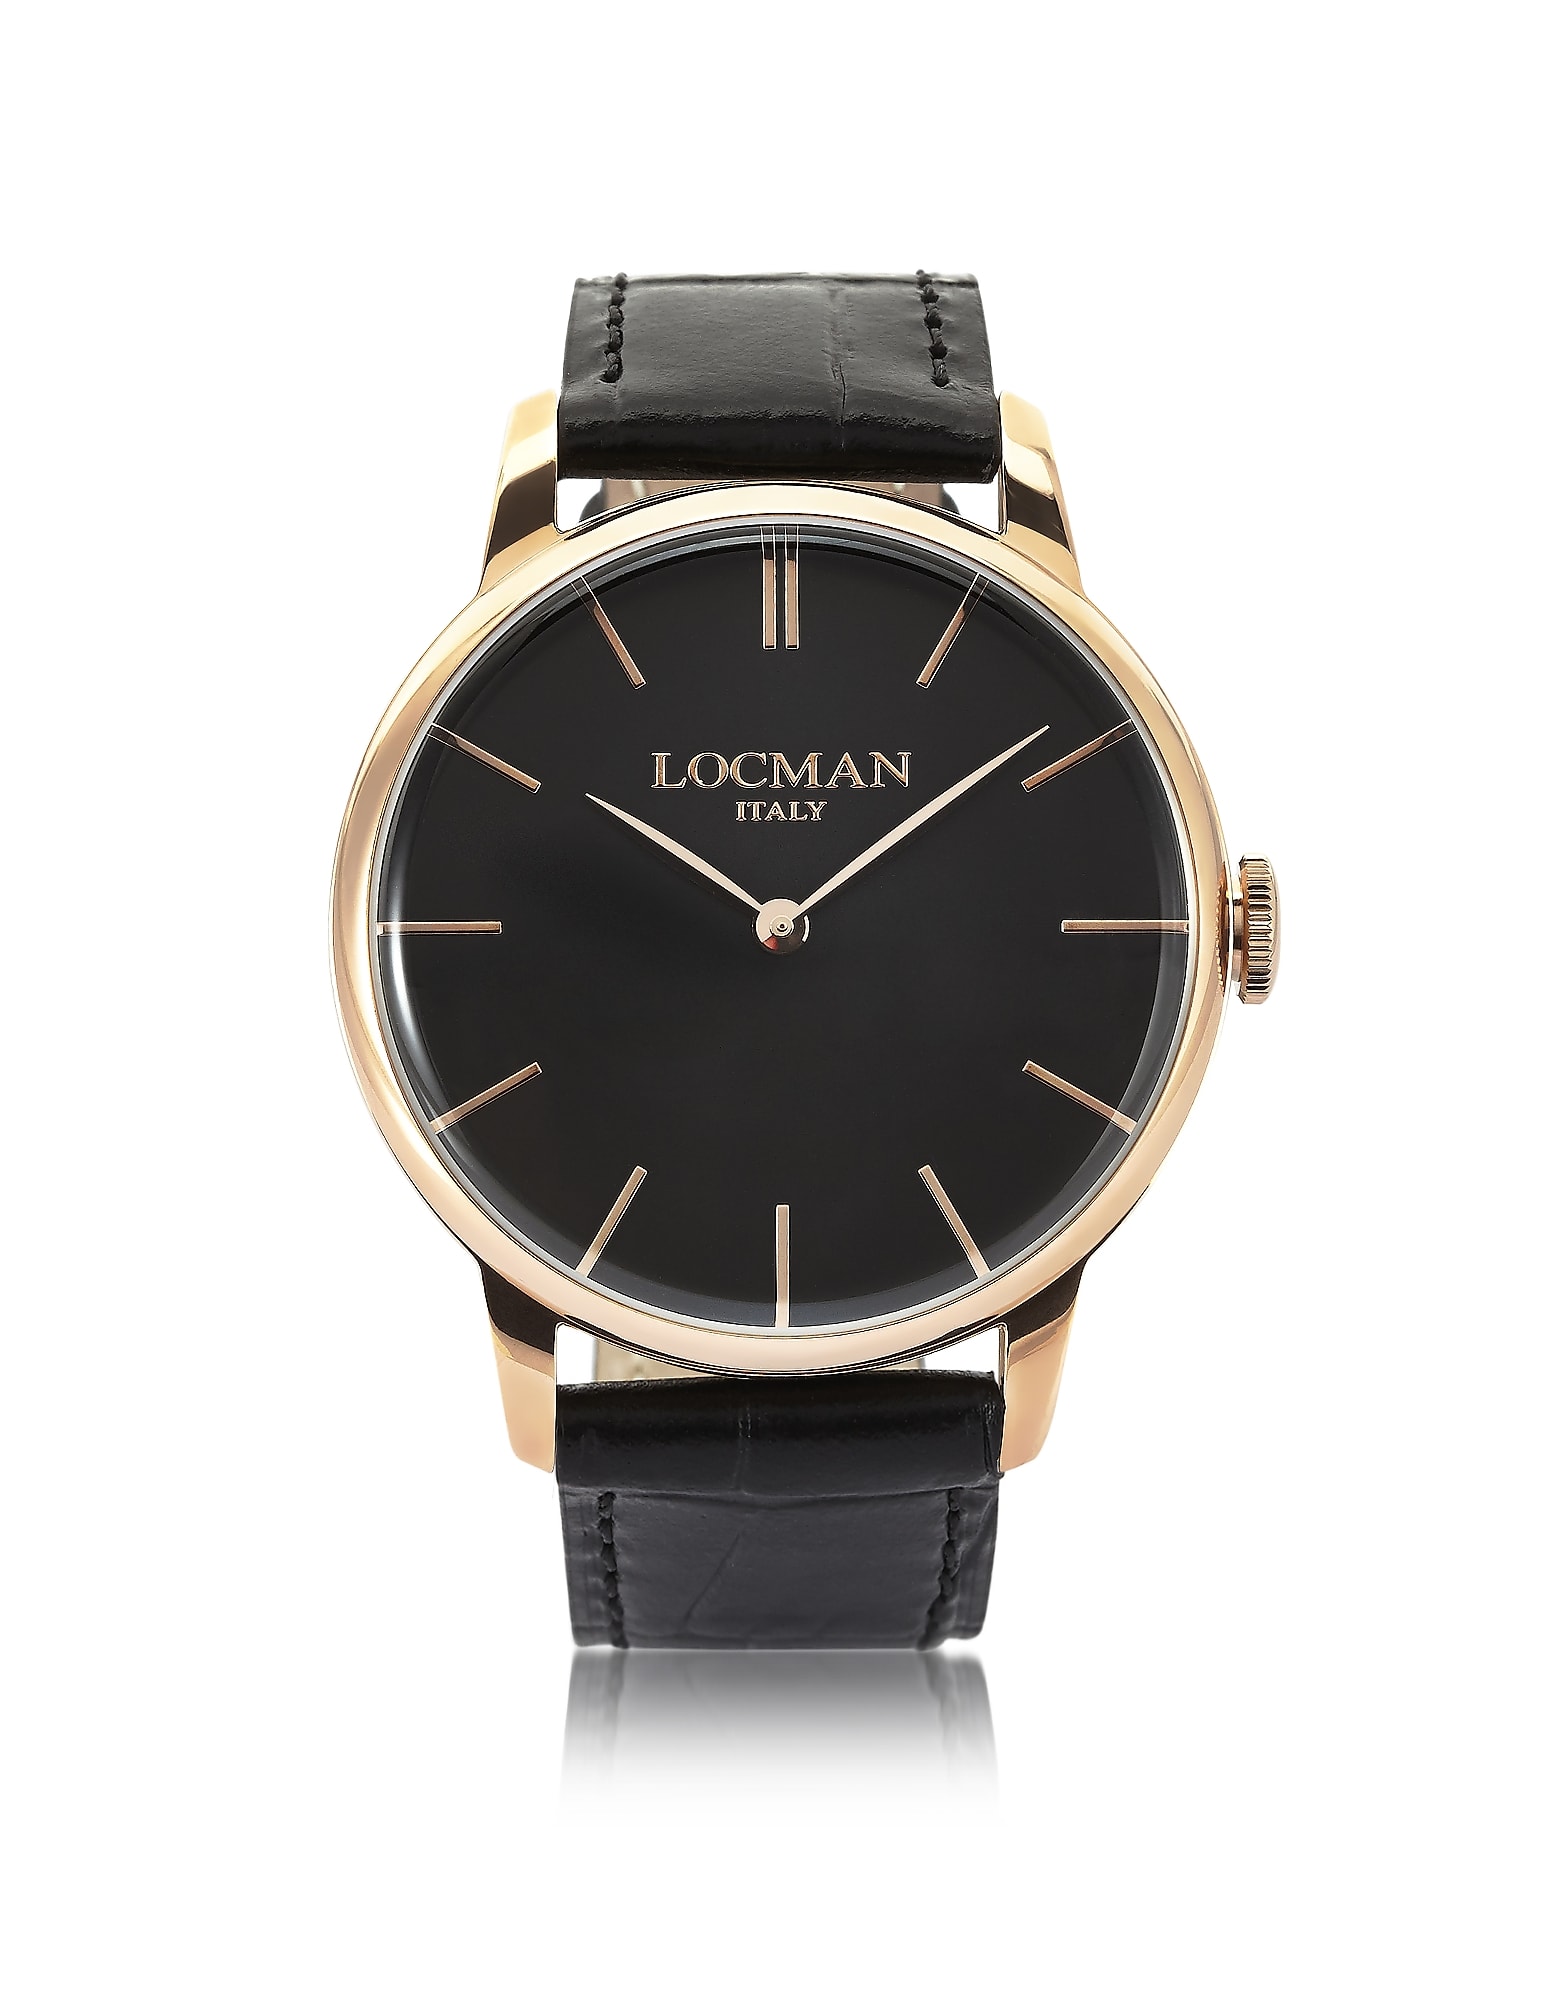 LOCMAN 1960 ROSE GOLD PVD STAINLESS STEEL MENS WATCH,11294767